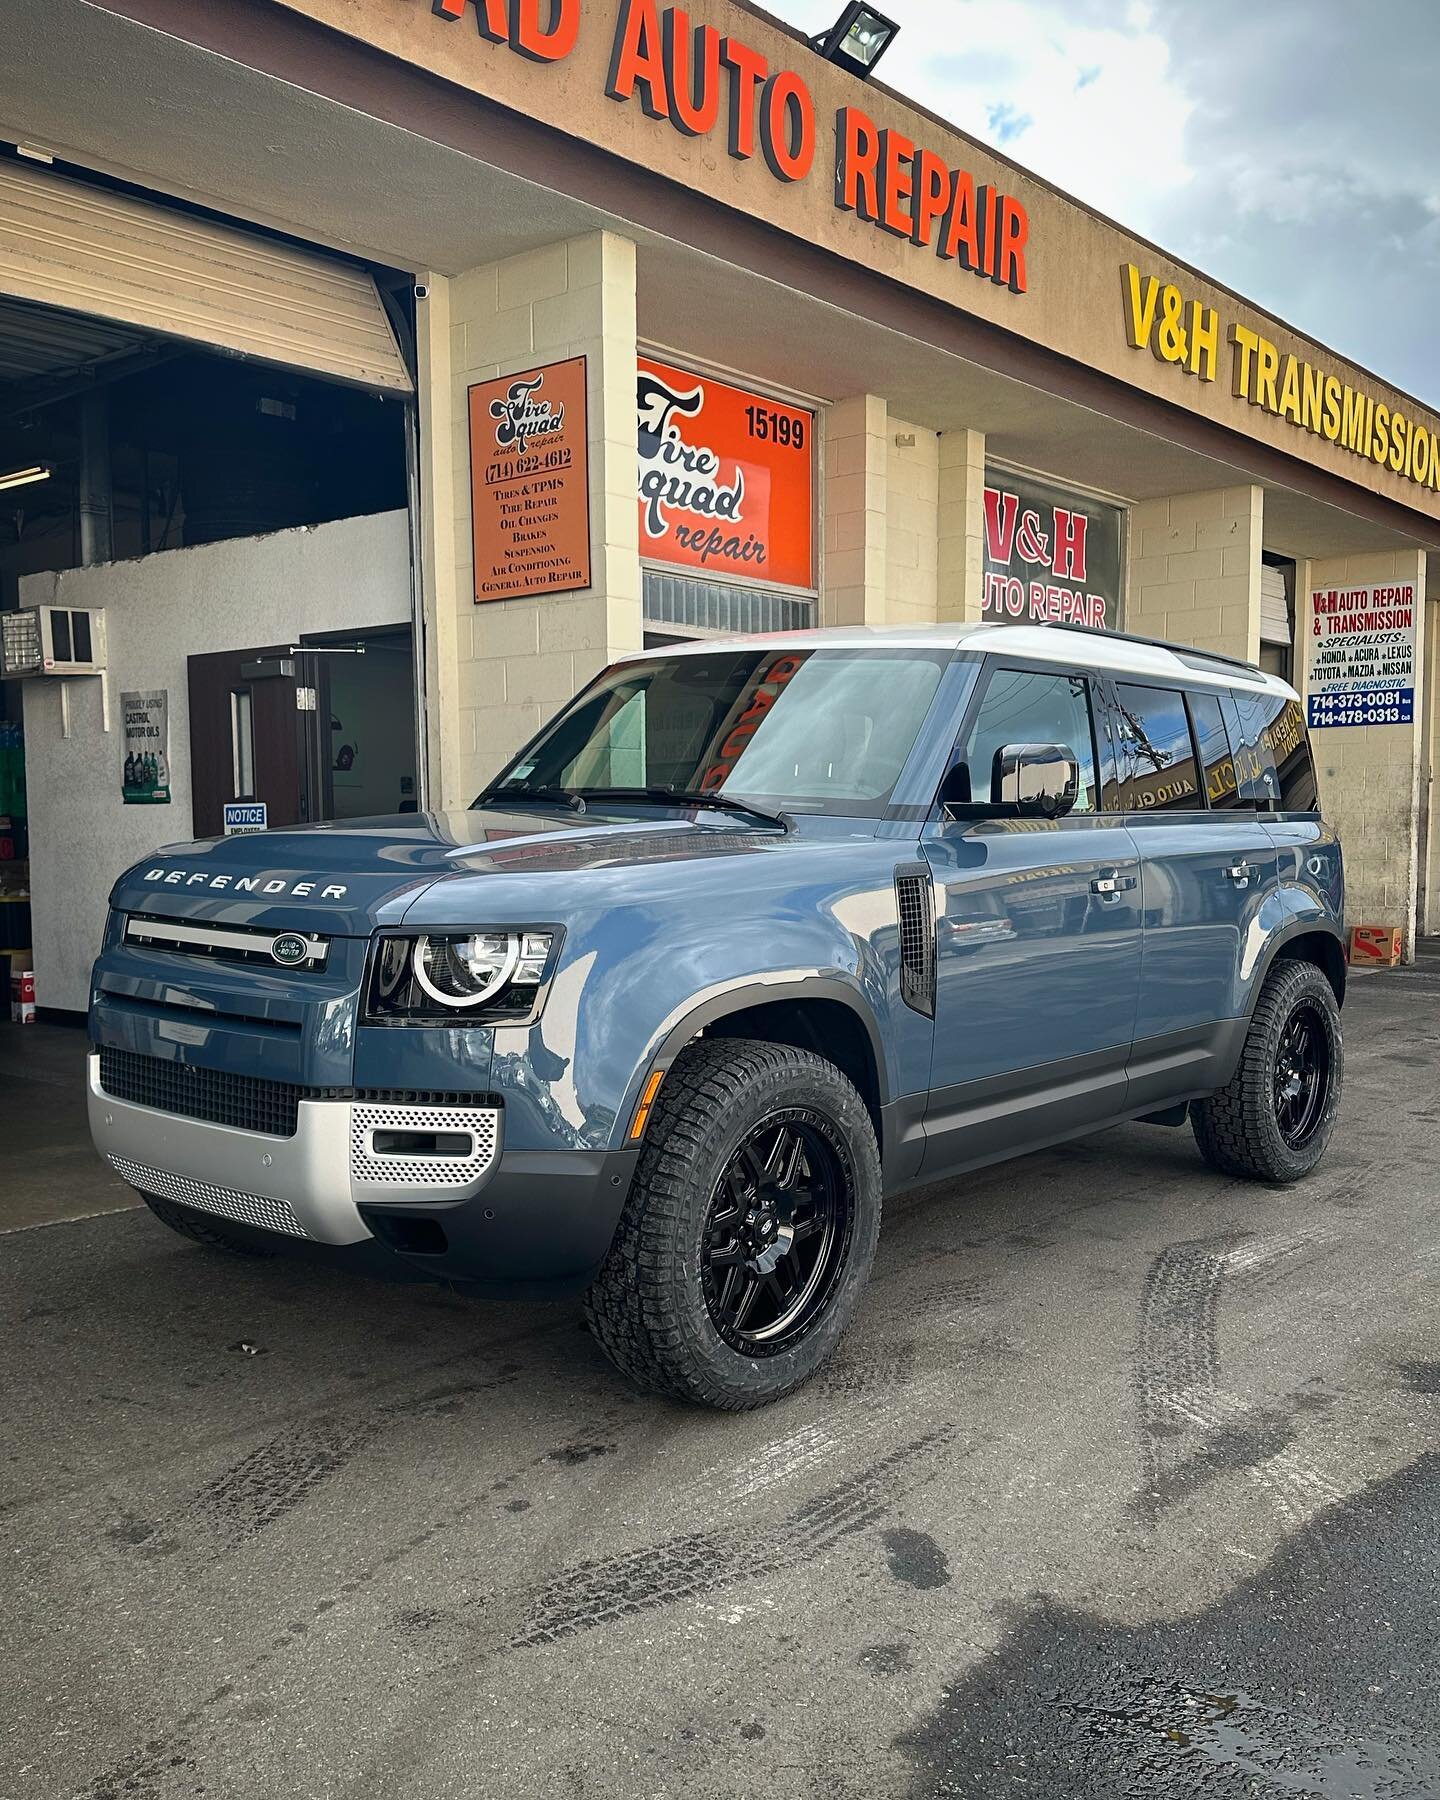 Our customer wasted absolutely no time getting new @mantra.wheels and @pirelli Scorpion all terrain tires on his brand spanking new Land Rover Defender 110!
.
.
.
#tiresquad #tiresquadwestminster #landrover #rangerover #defender110 #defender #landrov